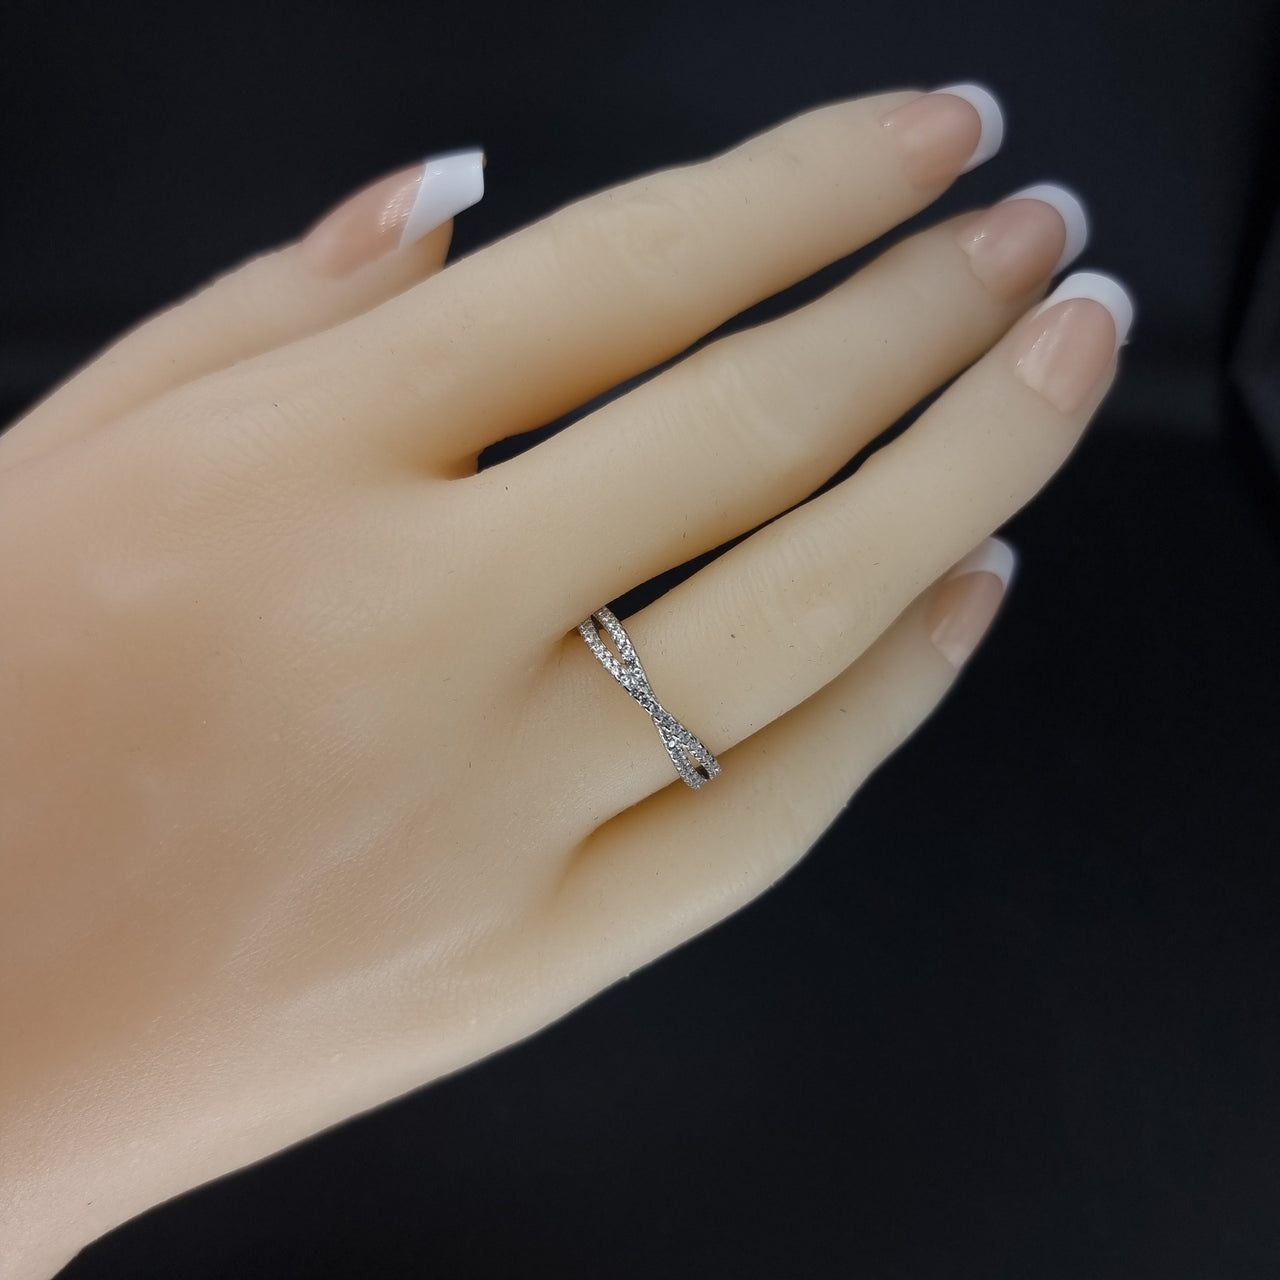 Clear Stones Braid Silver Ring